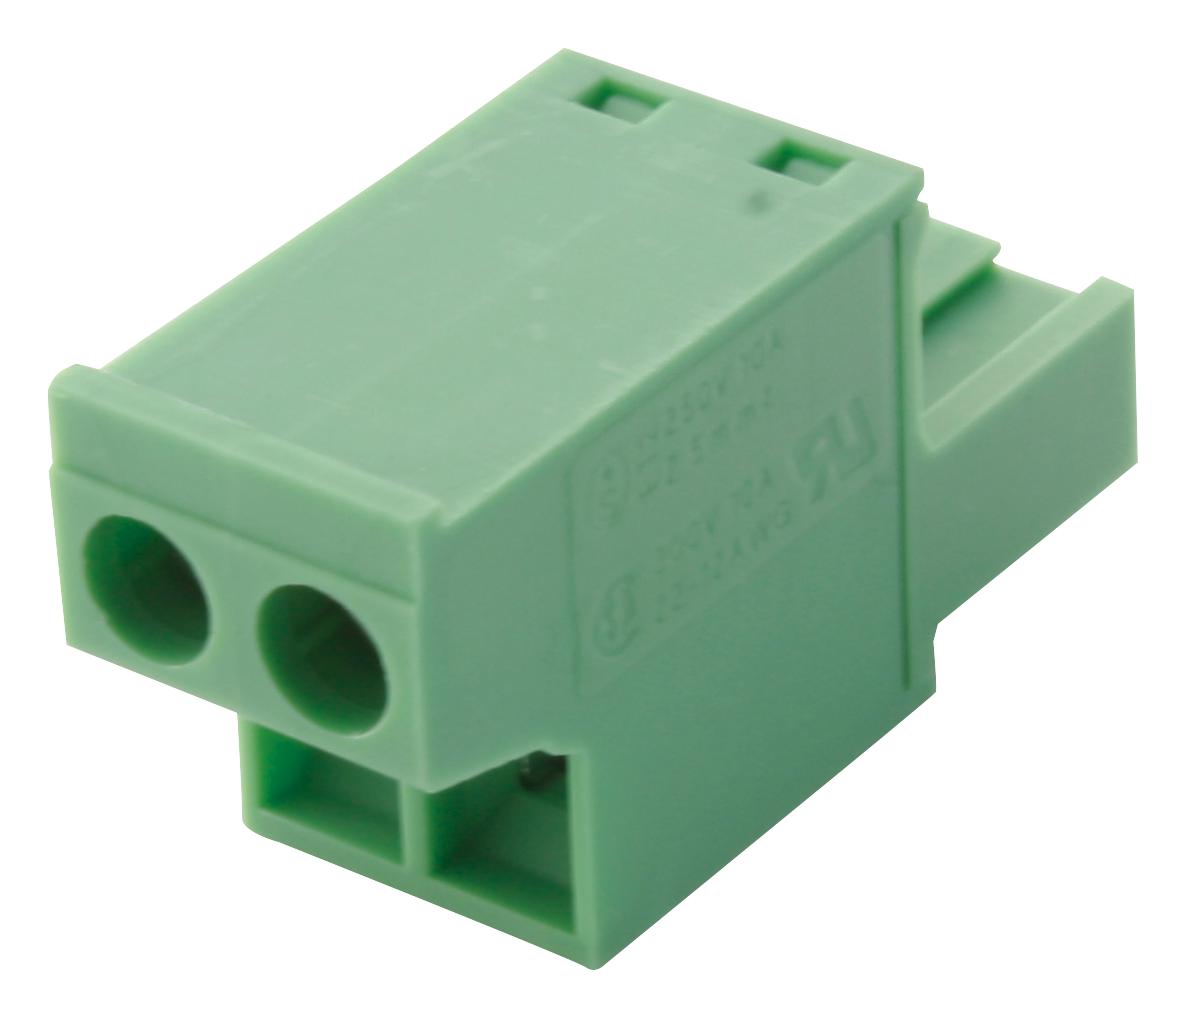 FRONT-MSTB2,5/6-ST-5,08 TERMINAL BLOCK, PLUGGABLE, 6POS, 12AWG PHOENIX CONTACT